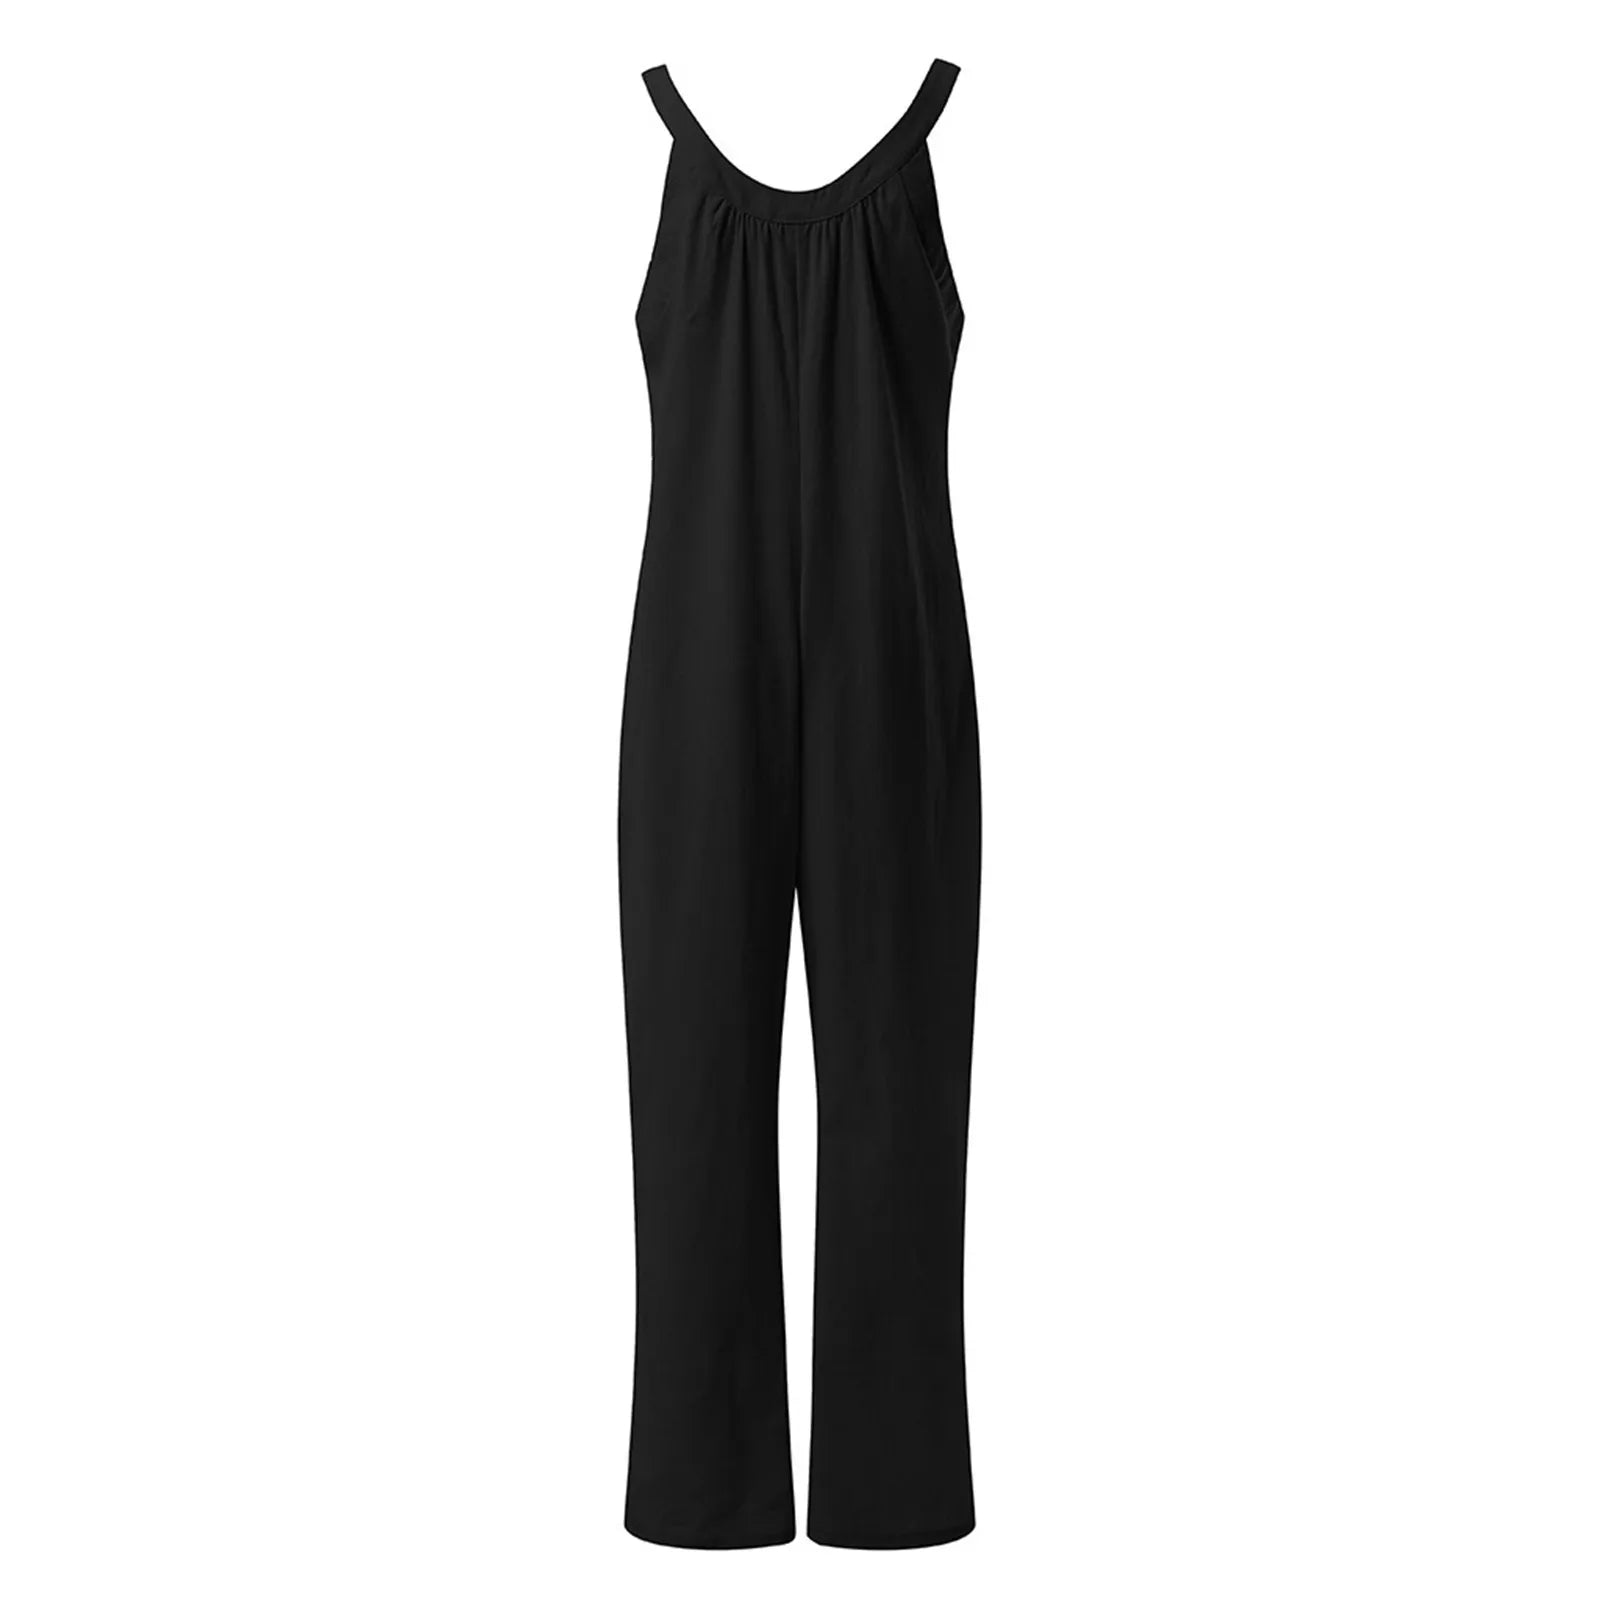 Versatile Chic: Women's Full-Length Casual Solid Pocket Romper with Thin Straps and Buttons